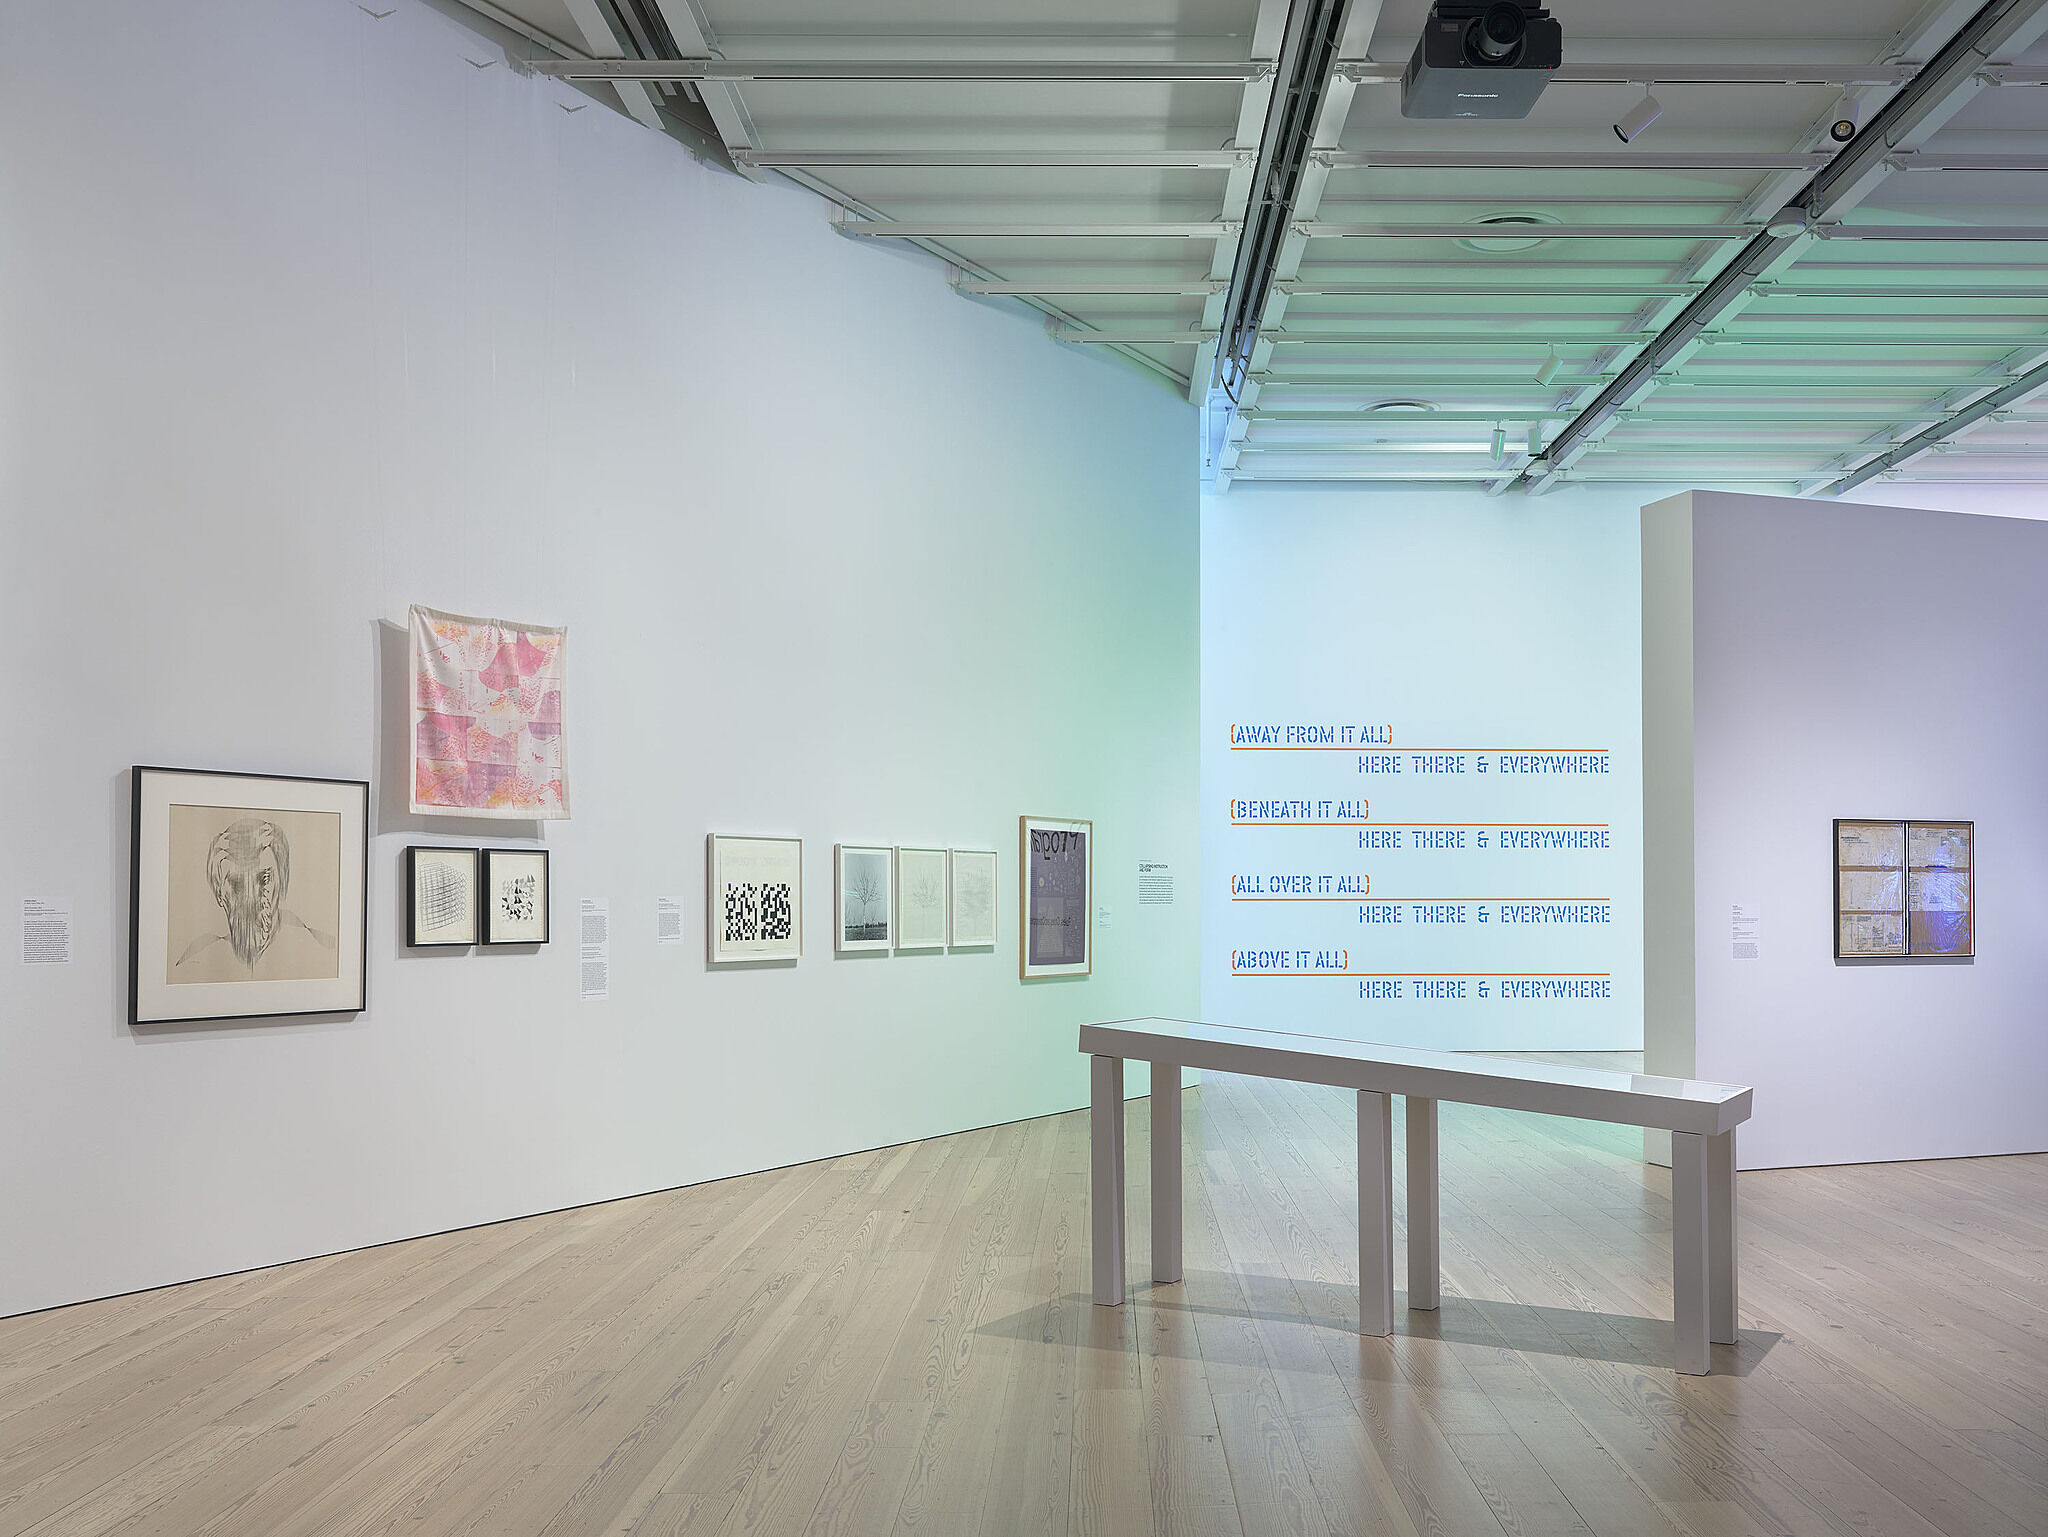 A photo of the Whitney galleries with various artworks.